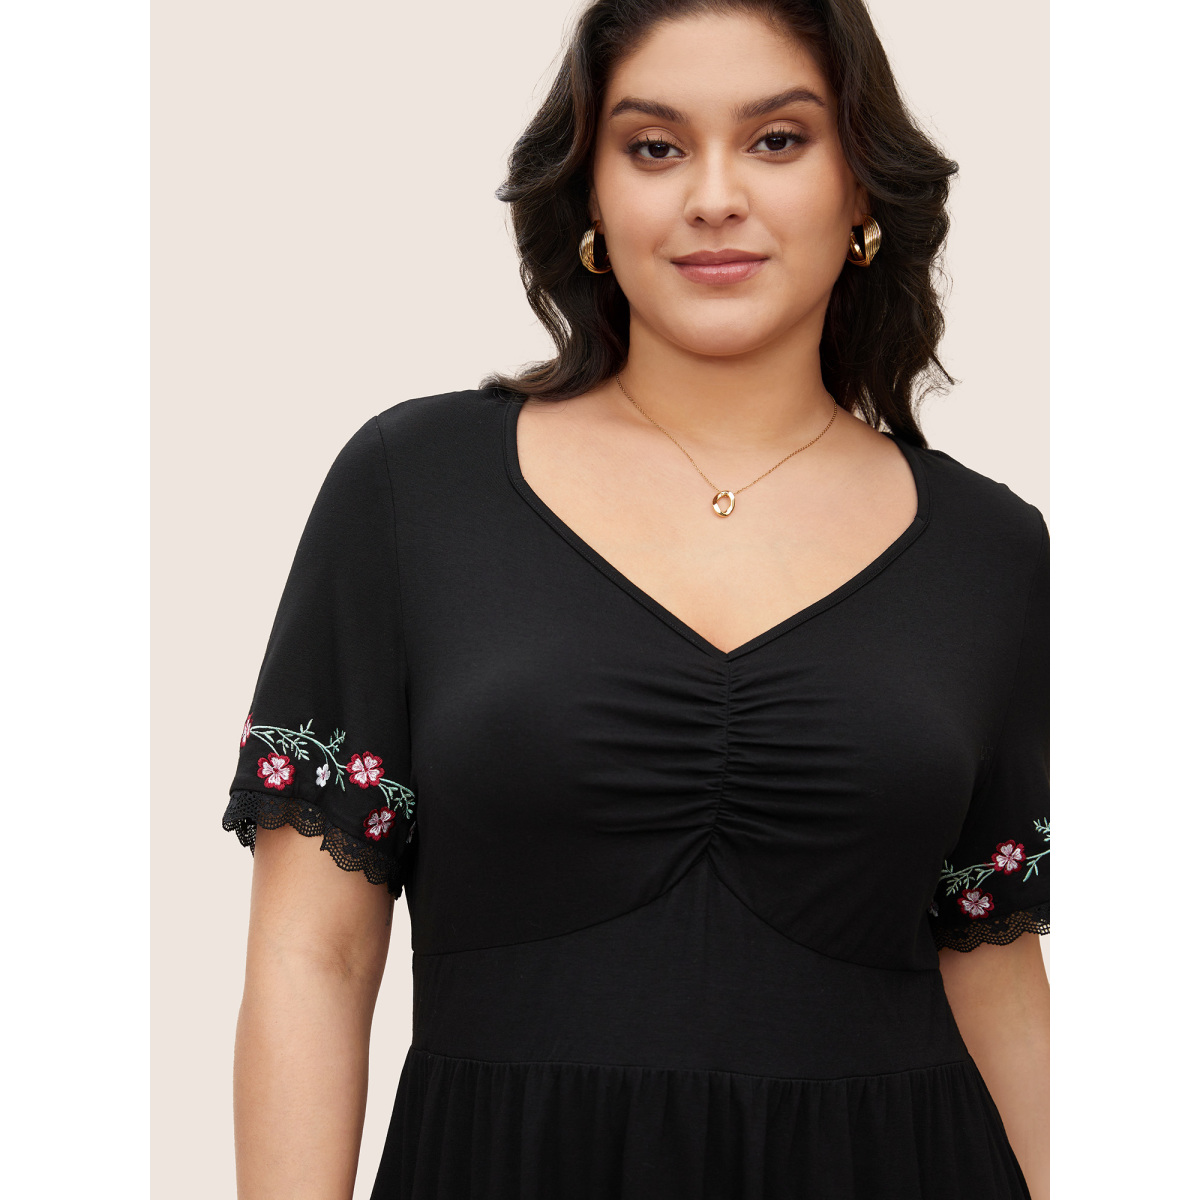 

Plus Size Floral Embroidered Lace Panel Ruched Knit Top Black Women Elegant Woven ribbon&lace trim Heart neckline Bodycon Everyday T-shirts BloomChic